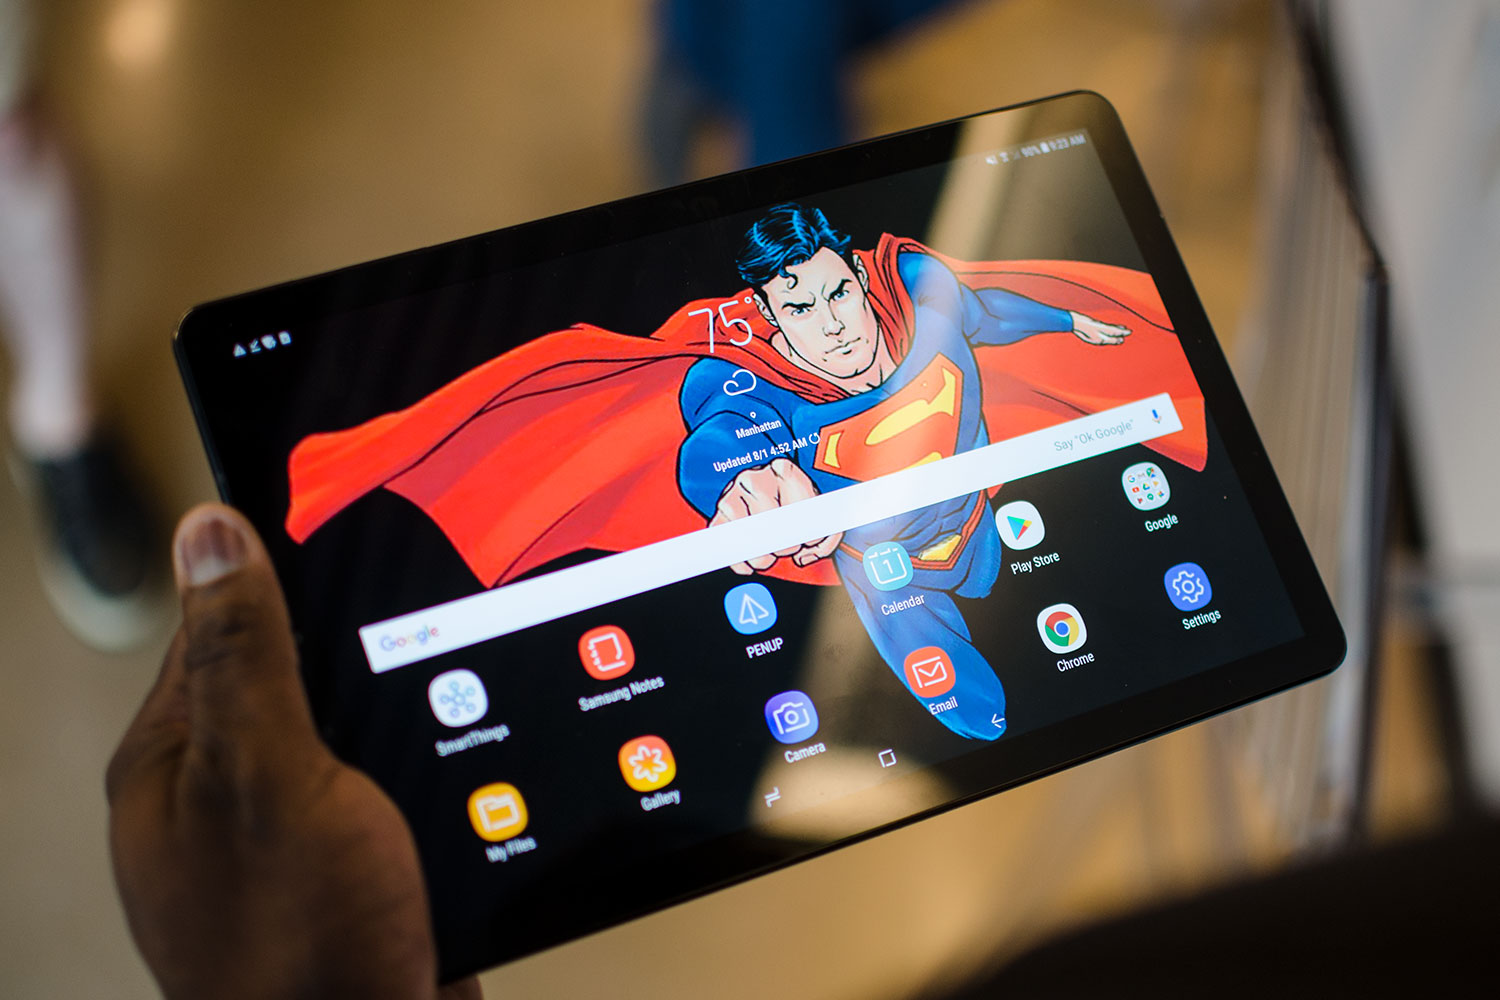 Samsung Galaxy Tab S4 vs. iPad Pro: Which Pro Tablet Takes the